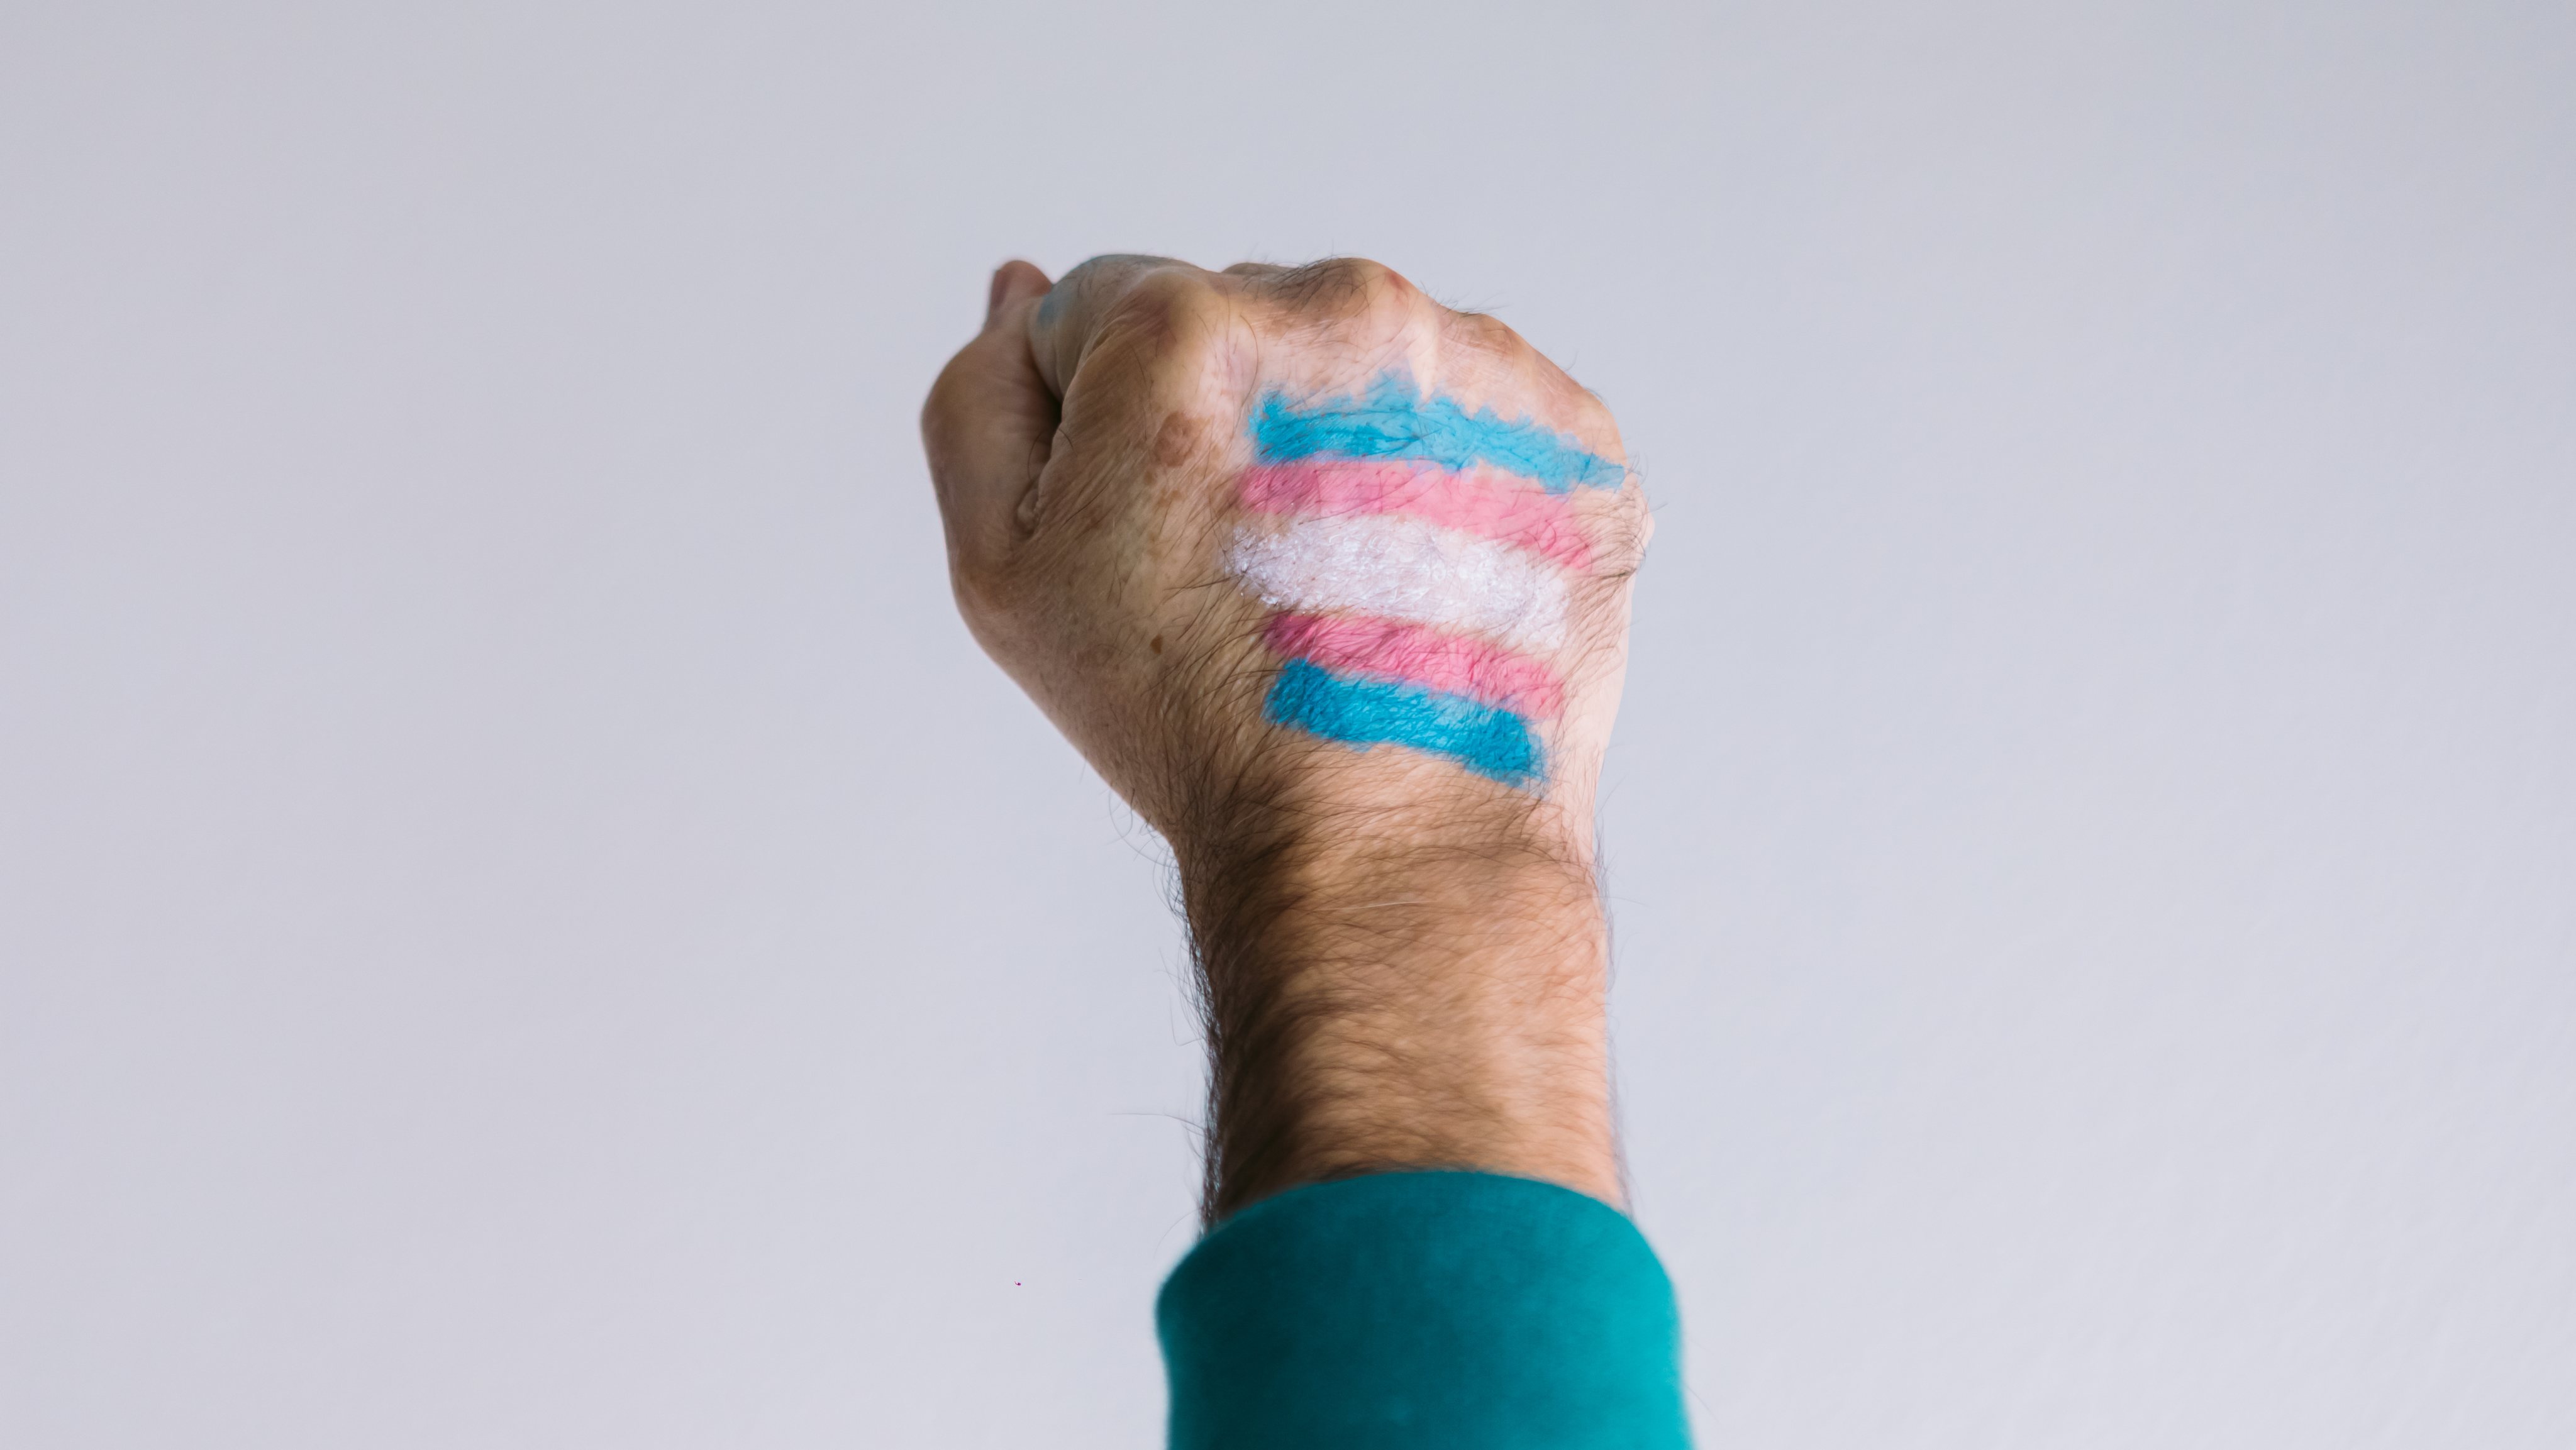 Clenched fist of a man with a painted transsexual flag, wearing an LGTBIQ flag bracelet